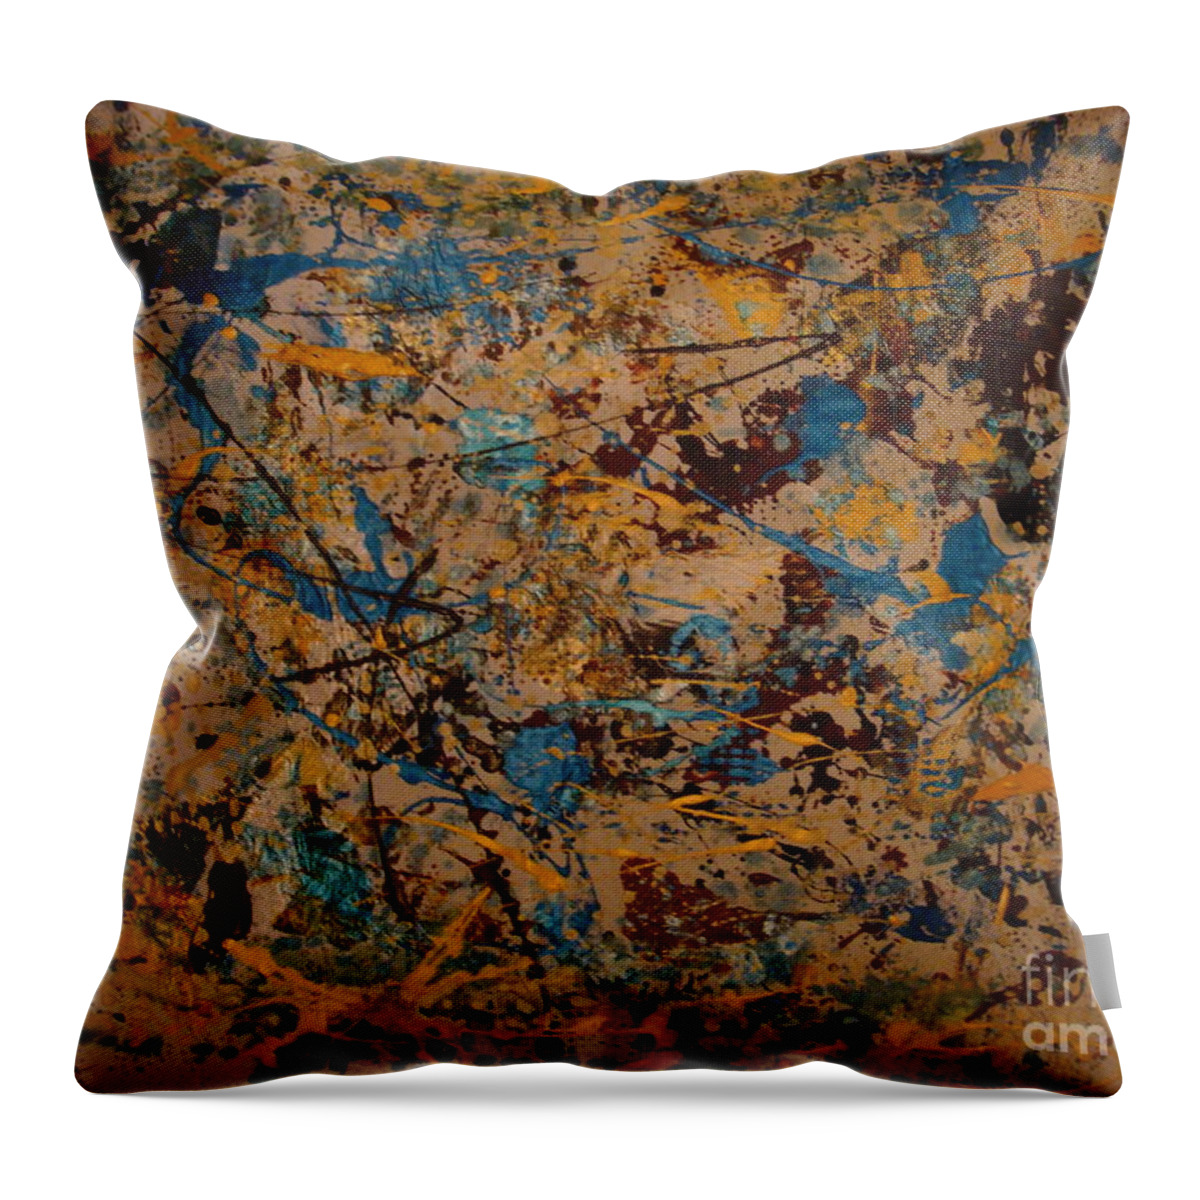 Time Throw Pillow featuring the painting Fire Work by Fereshteh Stoecklein